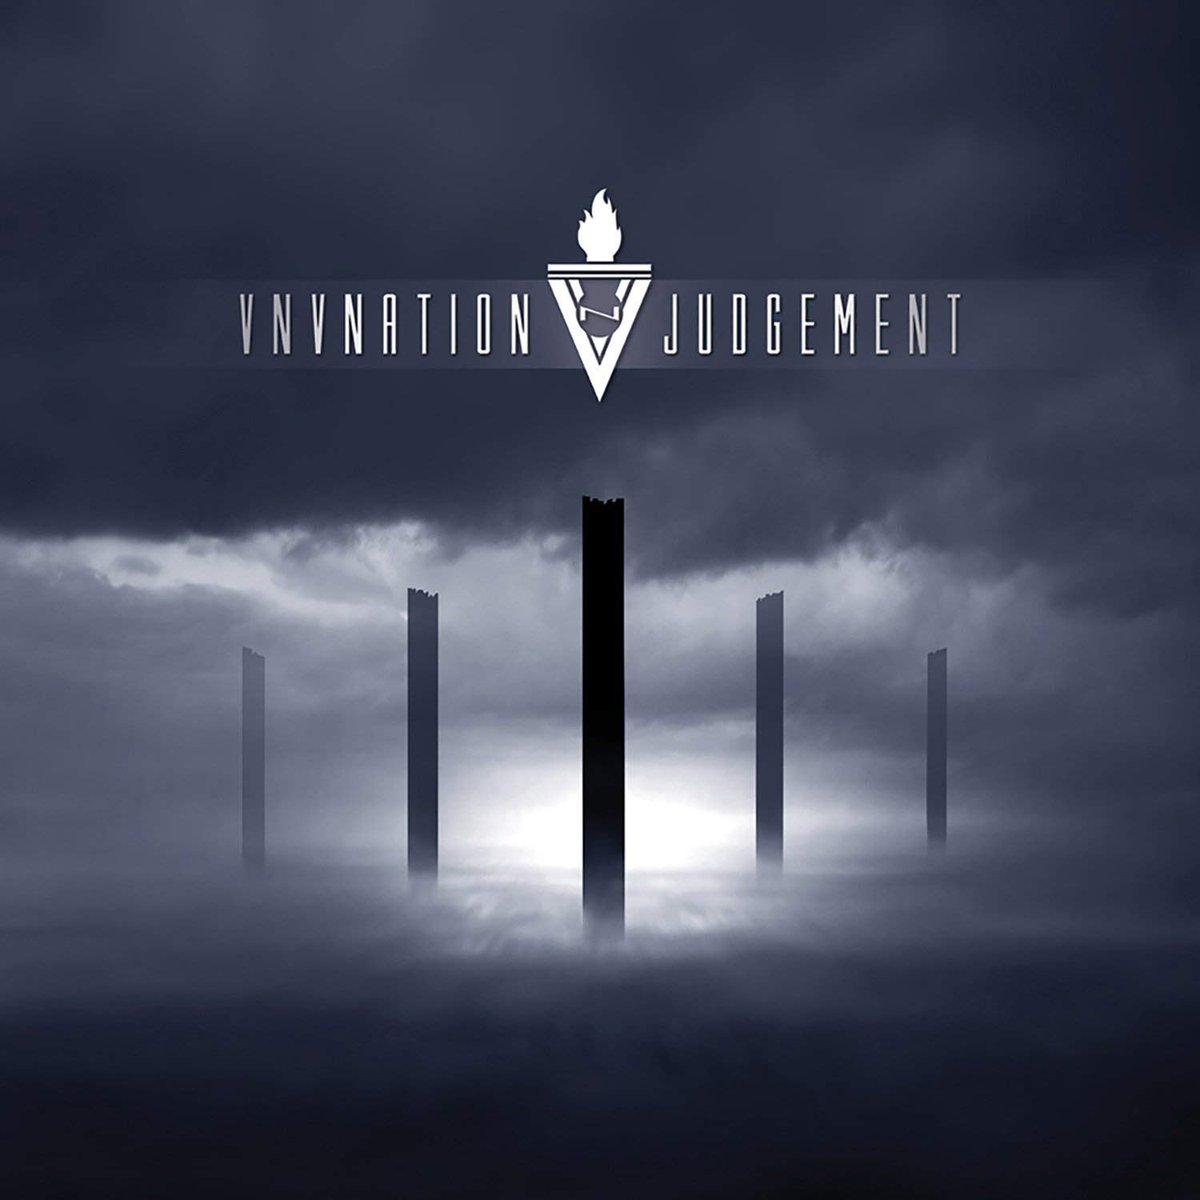 FORGOT HOW GREAT THIS RECORD IS #NOWPLAYING #VNVNATION #JUDGEMENT #SNYTHPOP #ELECTROPOP #ORCHESTRA